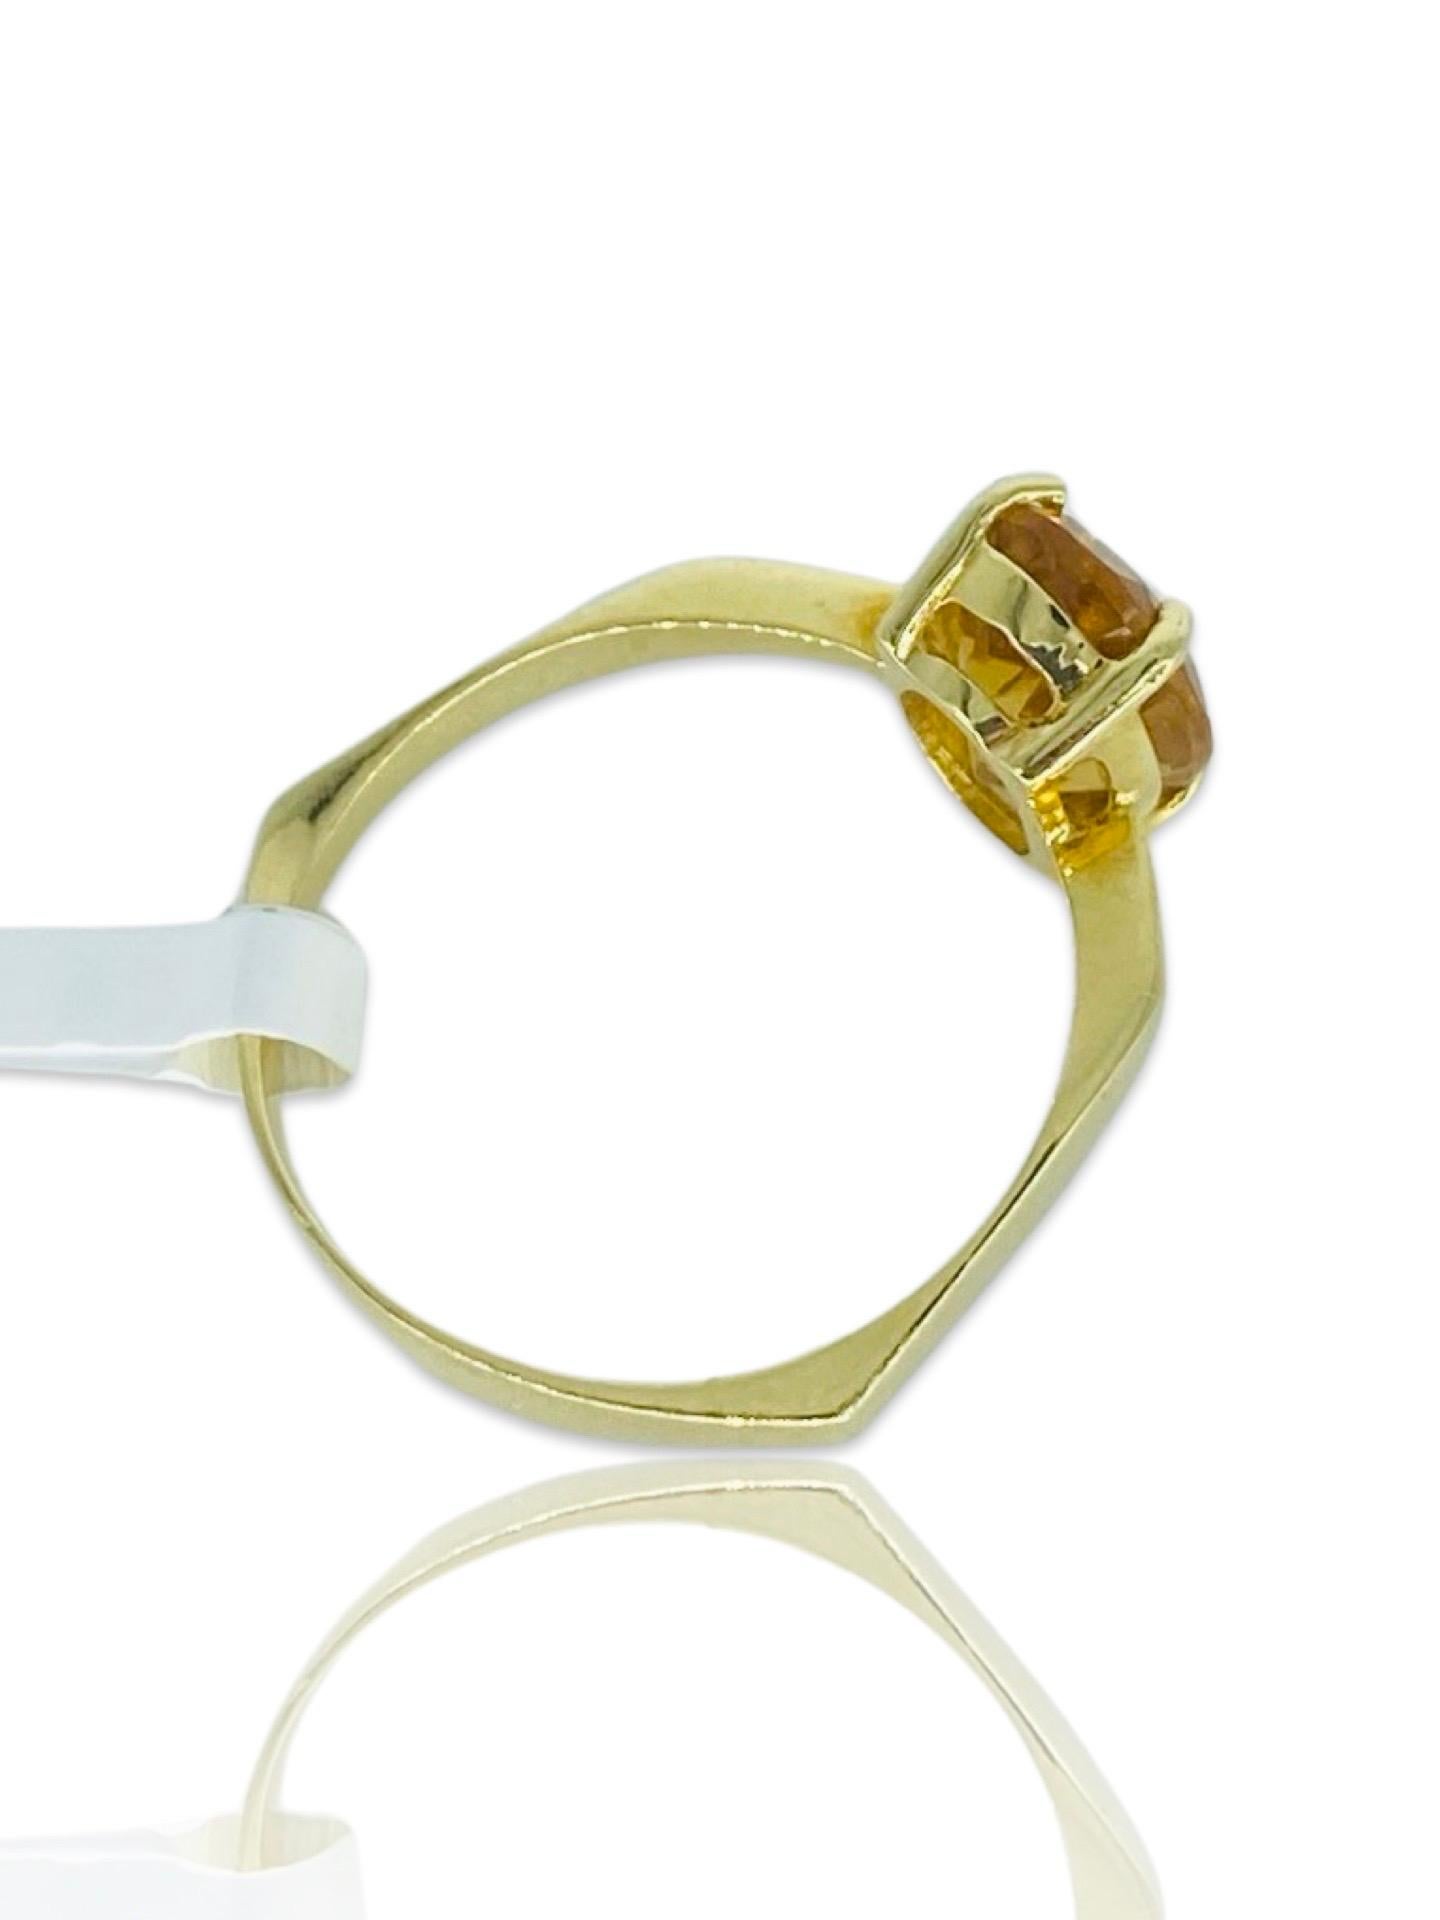 Vintage 1.60 Carat Oval Citrine Gemstone Octagon Shank Ring 18k Gold In Excellent Condition For Sale In Miami, FL